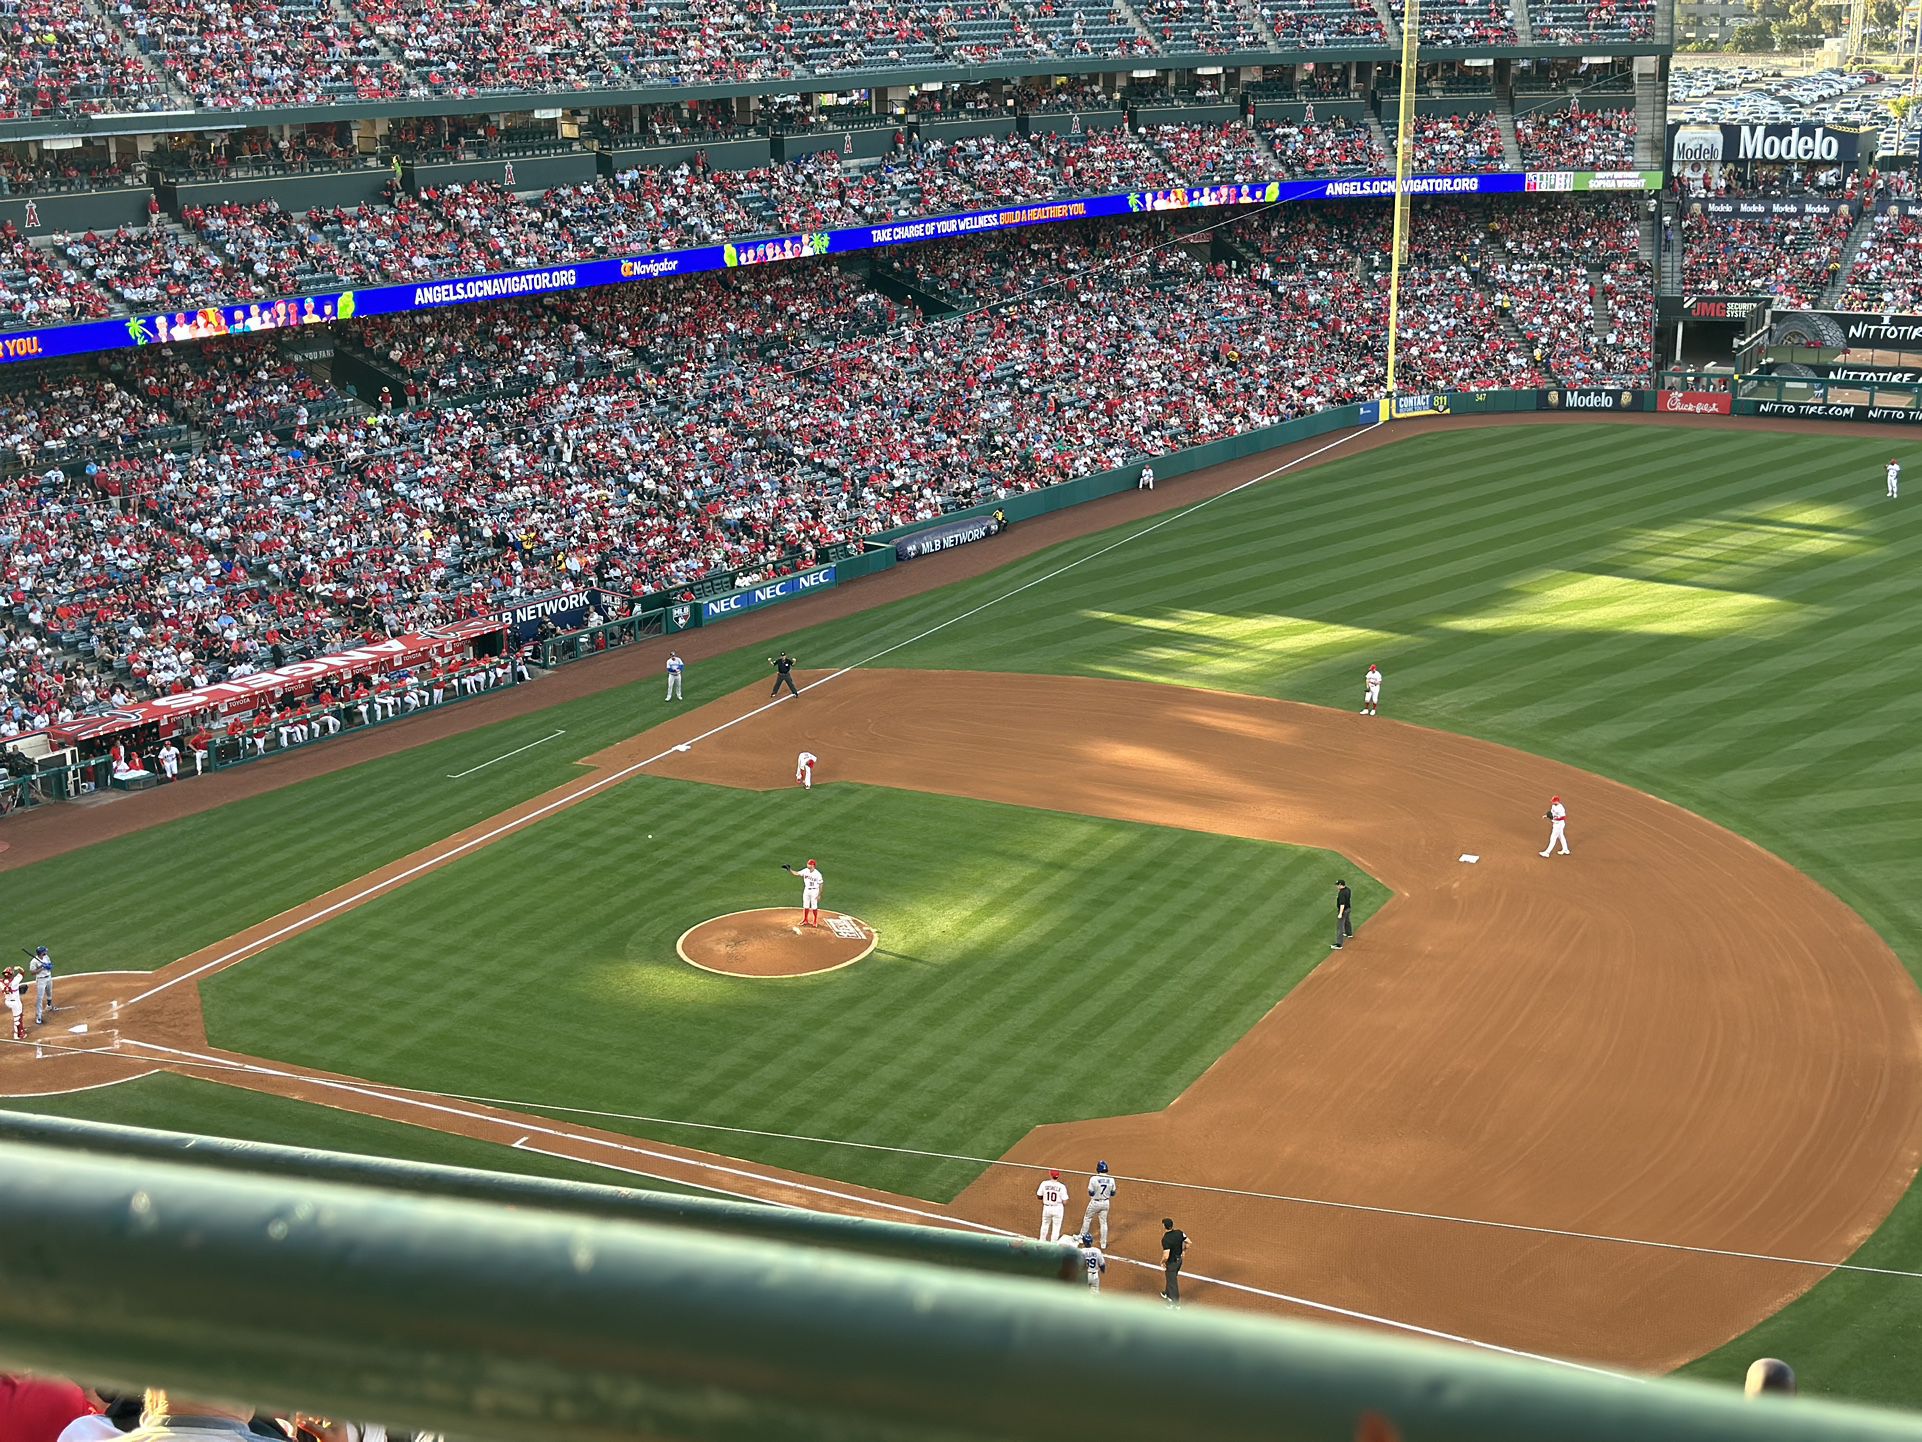 Chicago Cubs vs Los Angeles Angels of Anaheim with FREE PARKING